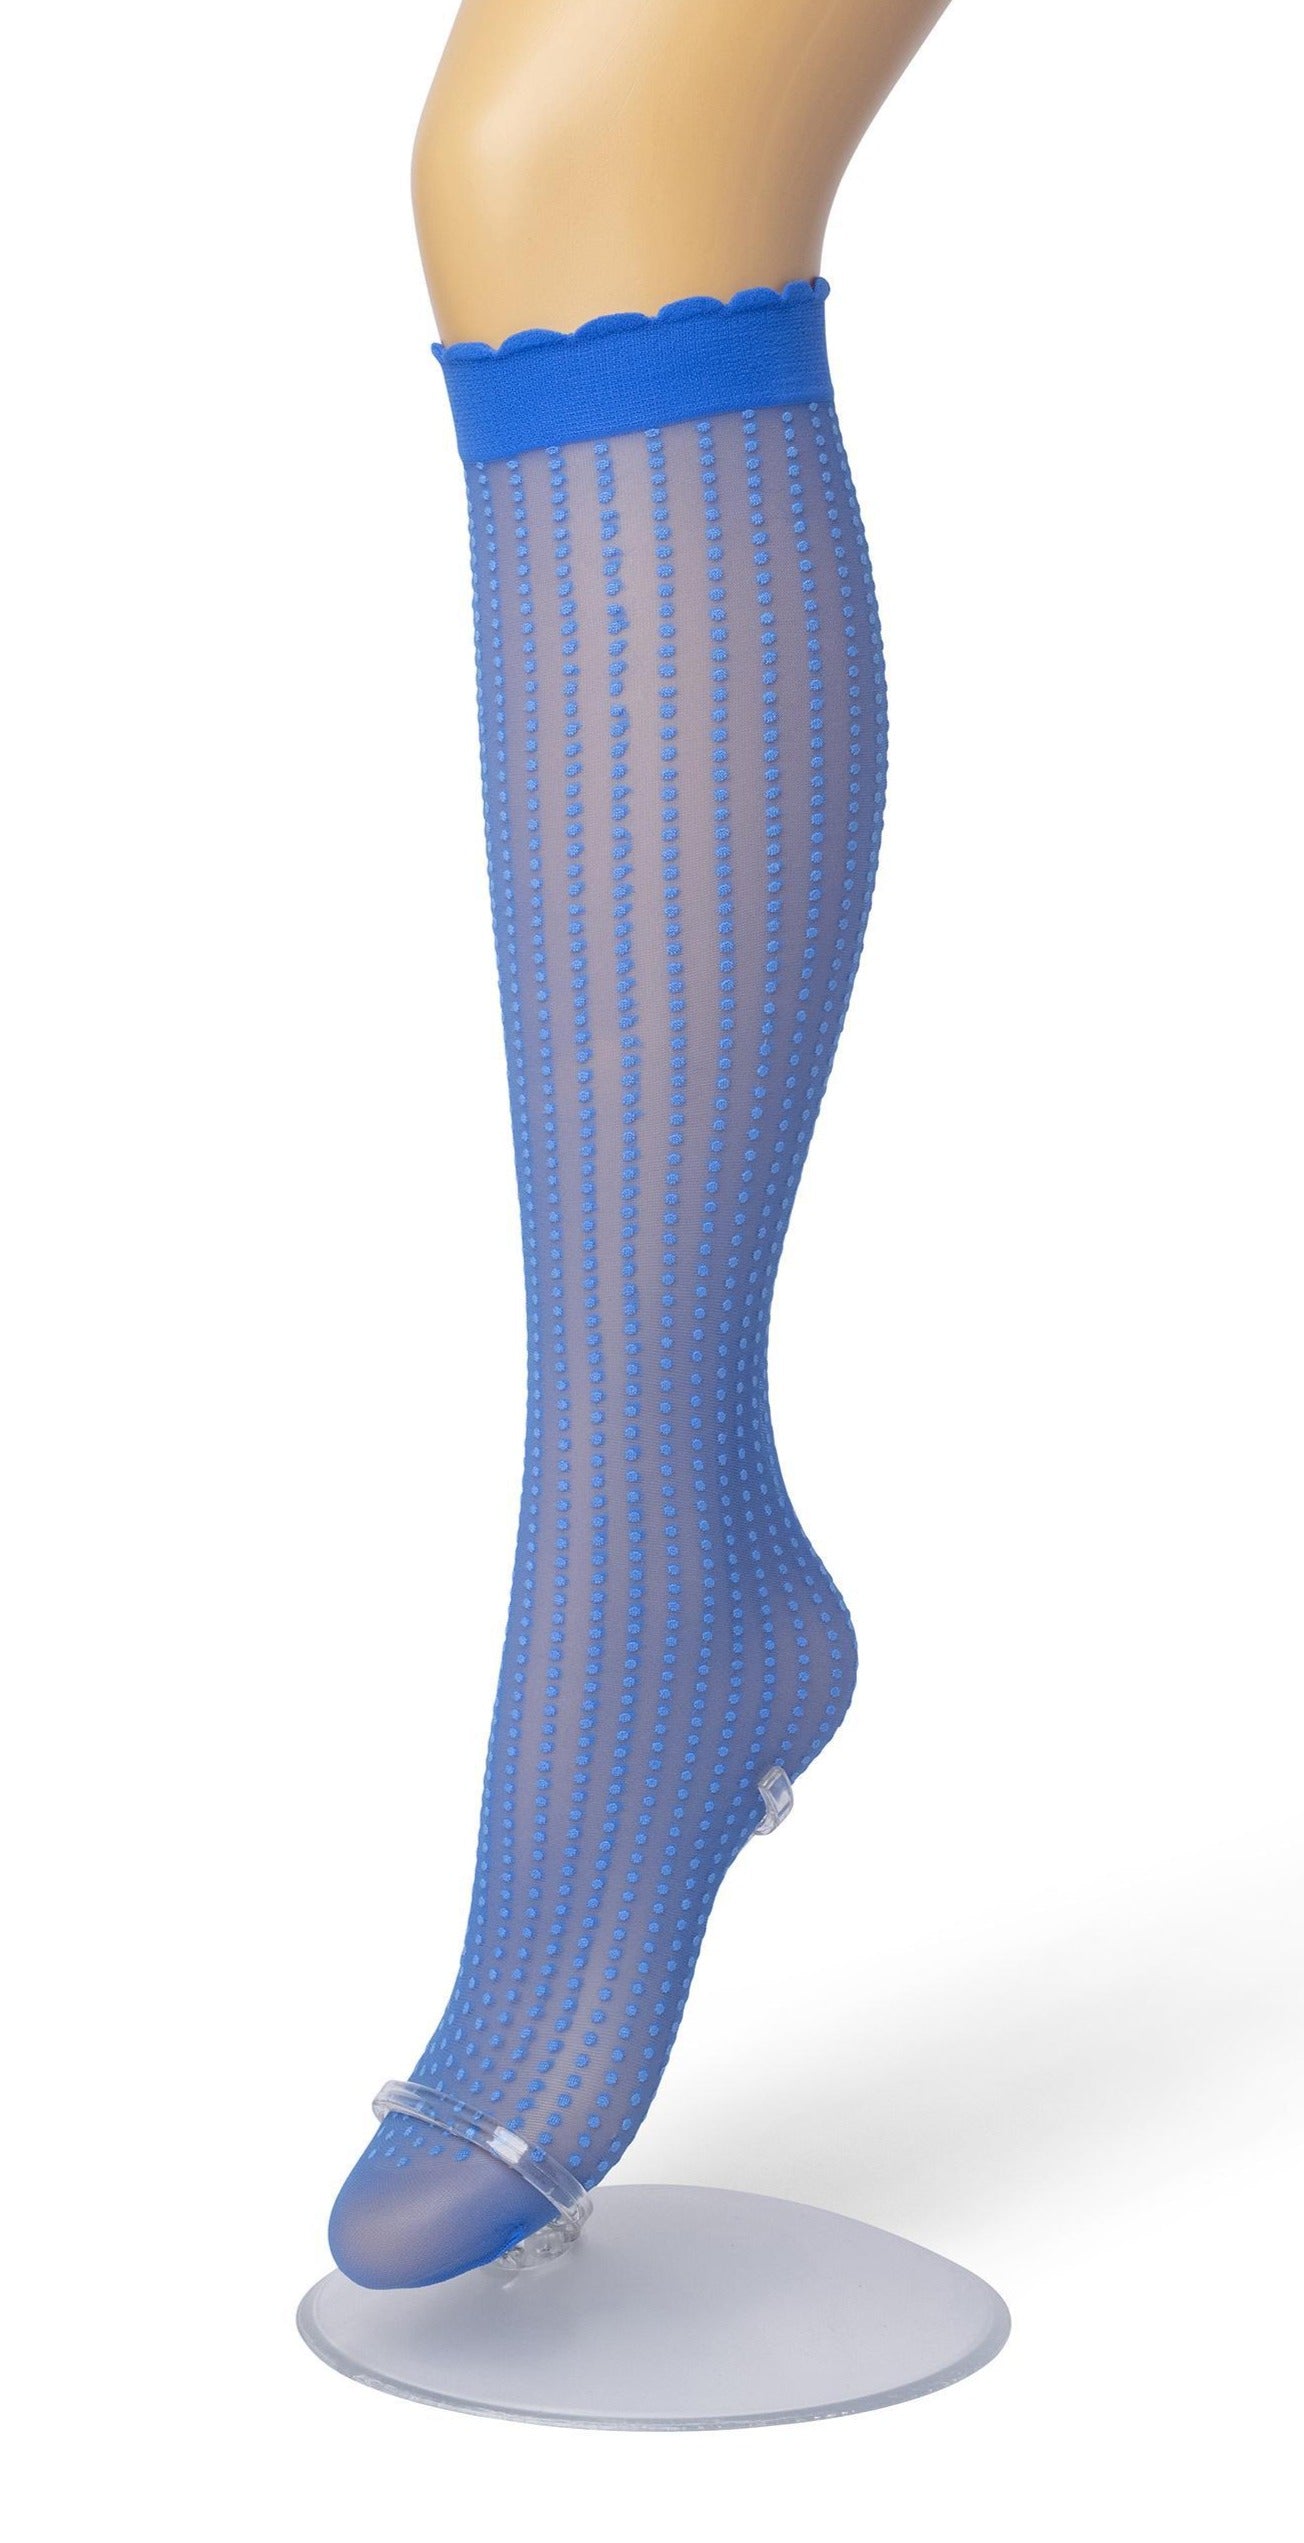 Bonnie Doon Batik Dots - Blue sheer fashion knee-high socks with a dotted vertical stripe pattern, deep comfort cuff with scalloped edge.